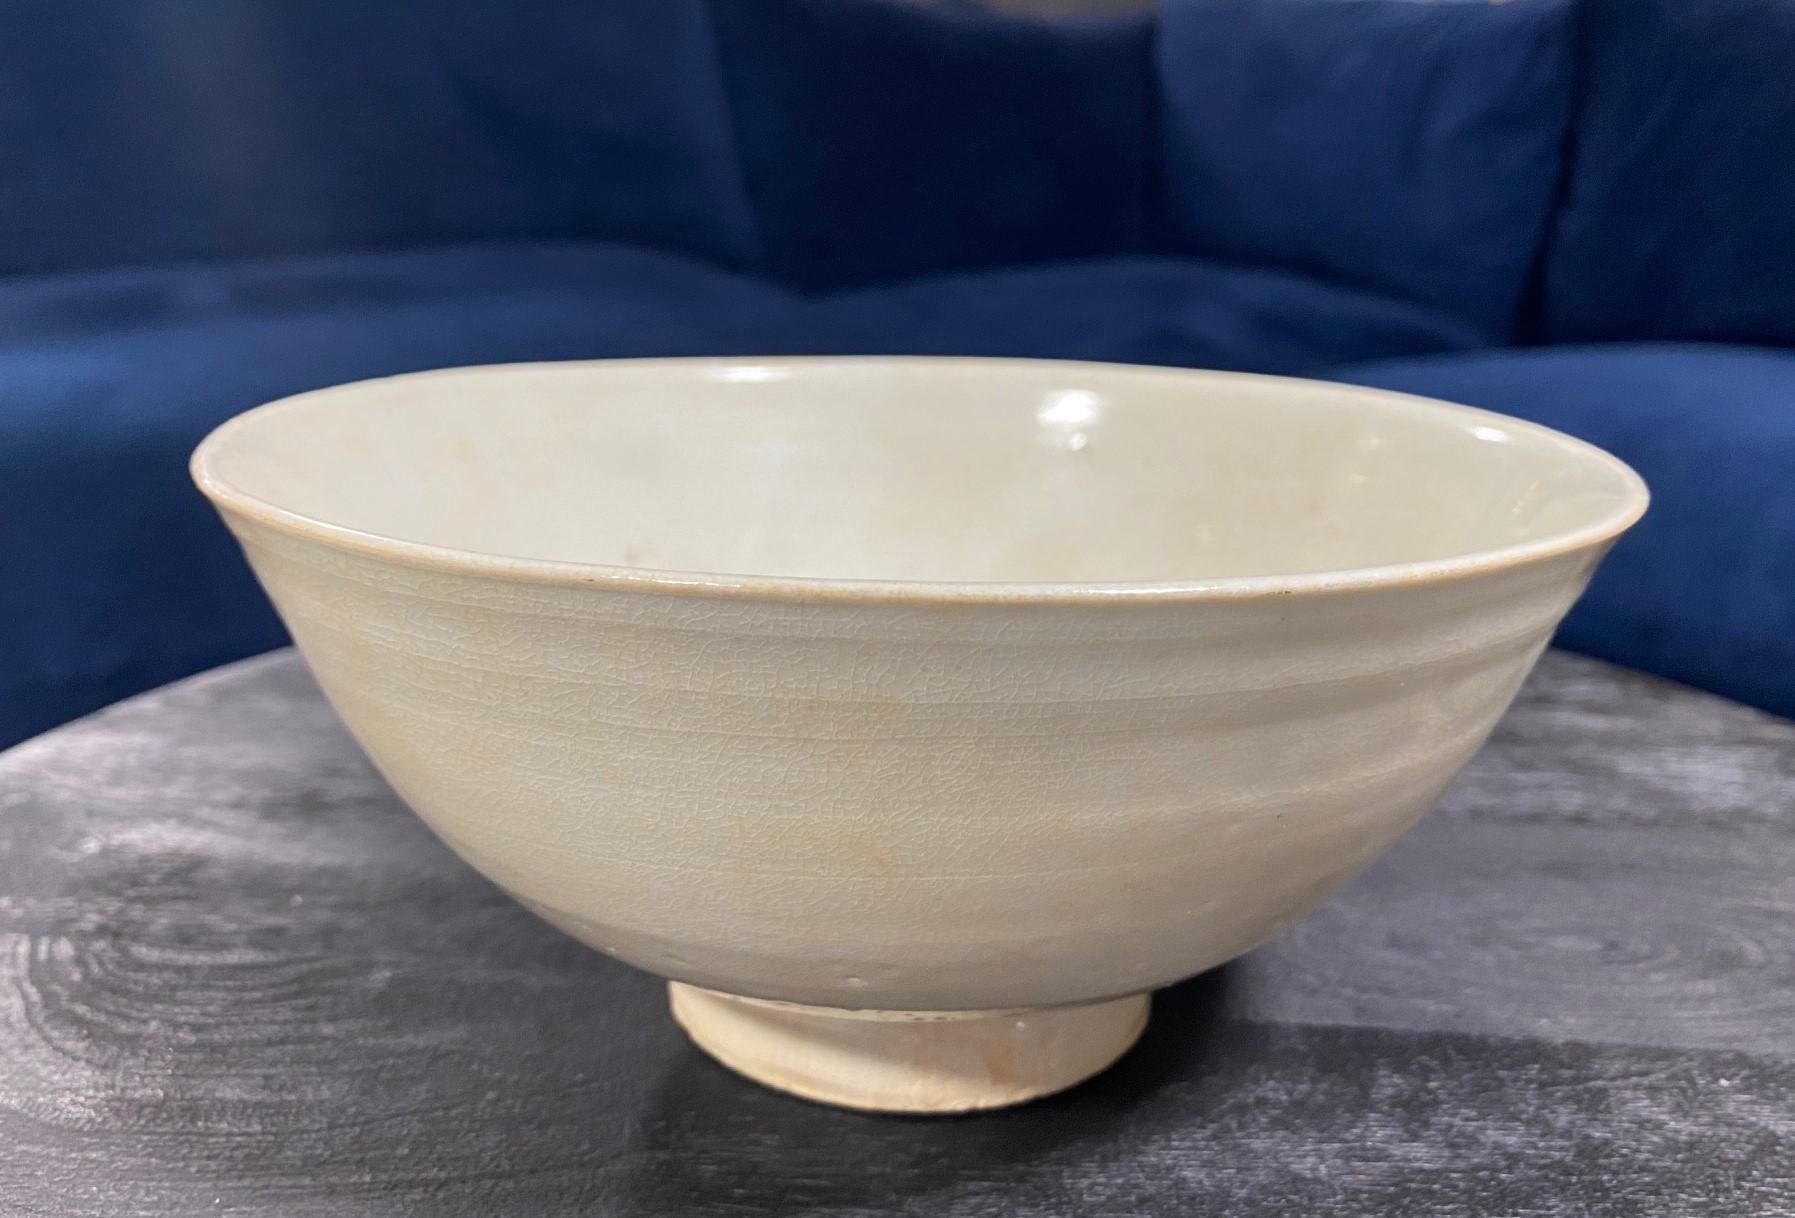 A wonderful Joseon Dynasty (1392-1897) Korean pottery bowl - perhaps a monk's Chawan tea bowl. The work features a beautiful white glaze, wonderful organic shape, engaging design and nicely aged patina. 

As this is not our area of expertise, we